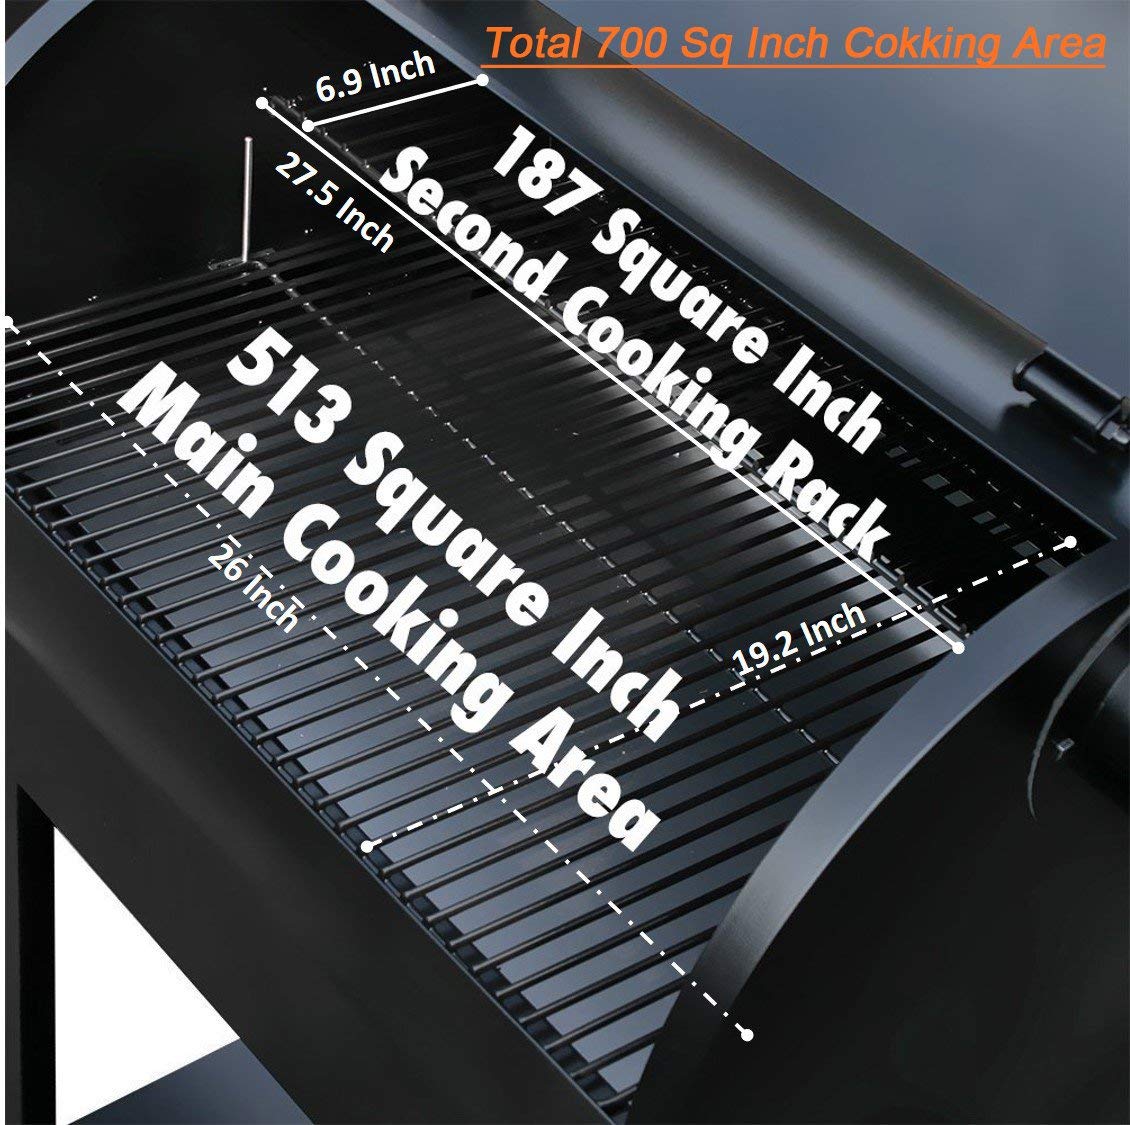 Z GRILLS ZPG-7002E 2019 New Model Wood Pellet Smoker, 8 in 1 BBQ Grill Auto Temperature Control, 700 sq inch Cooking Area, Silver Cover Included - image 5 of 7